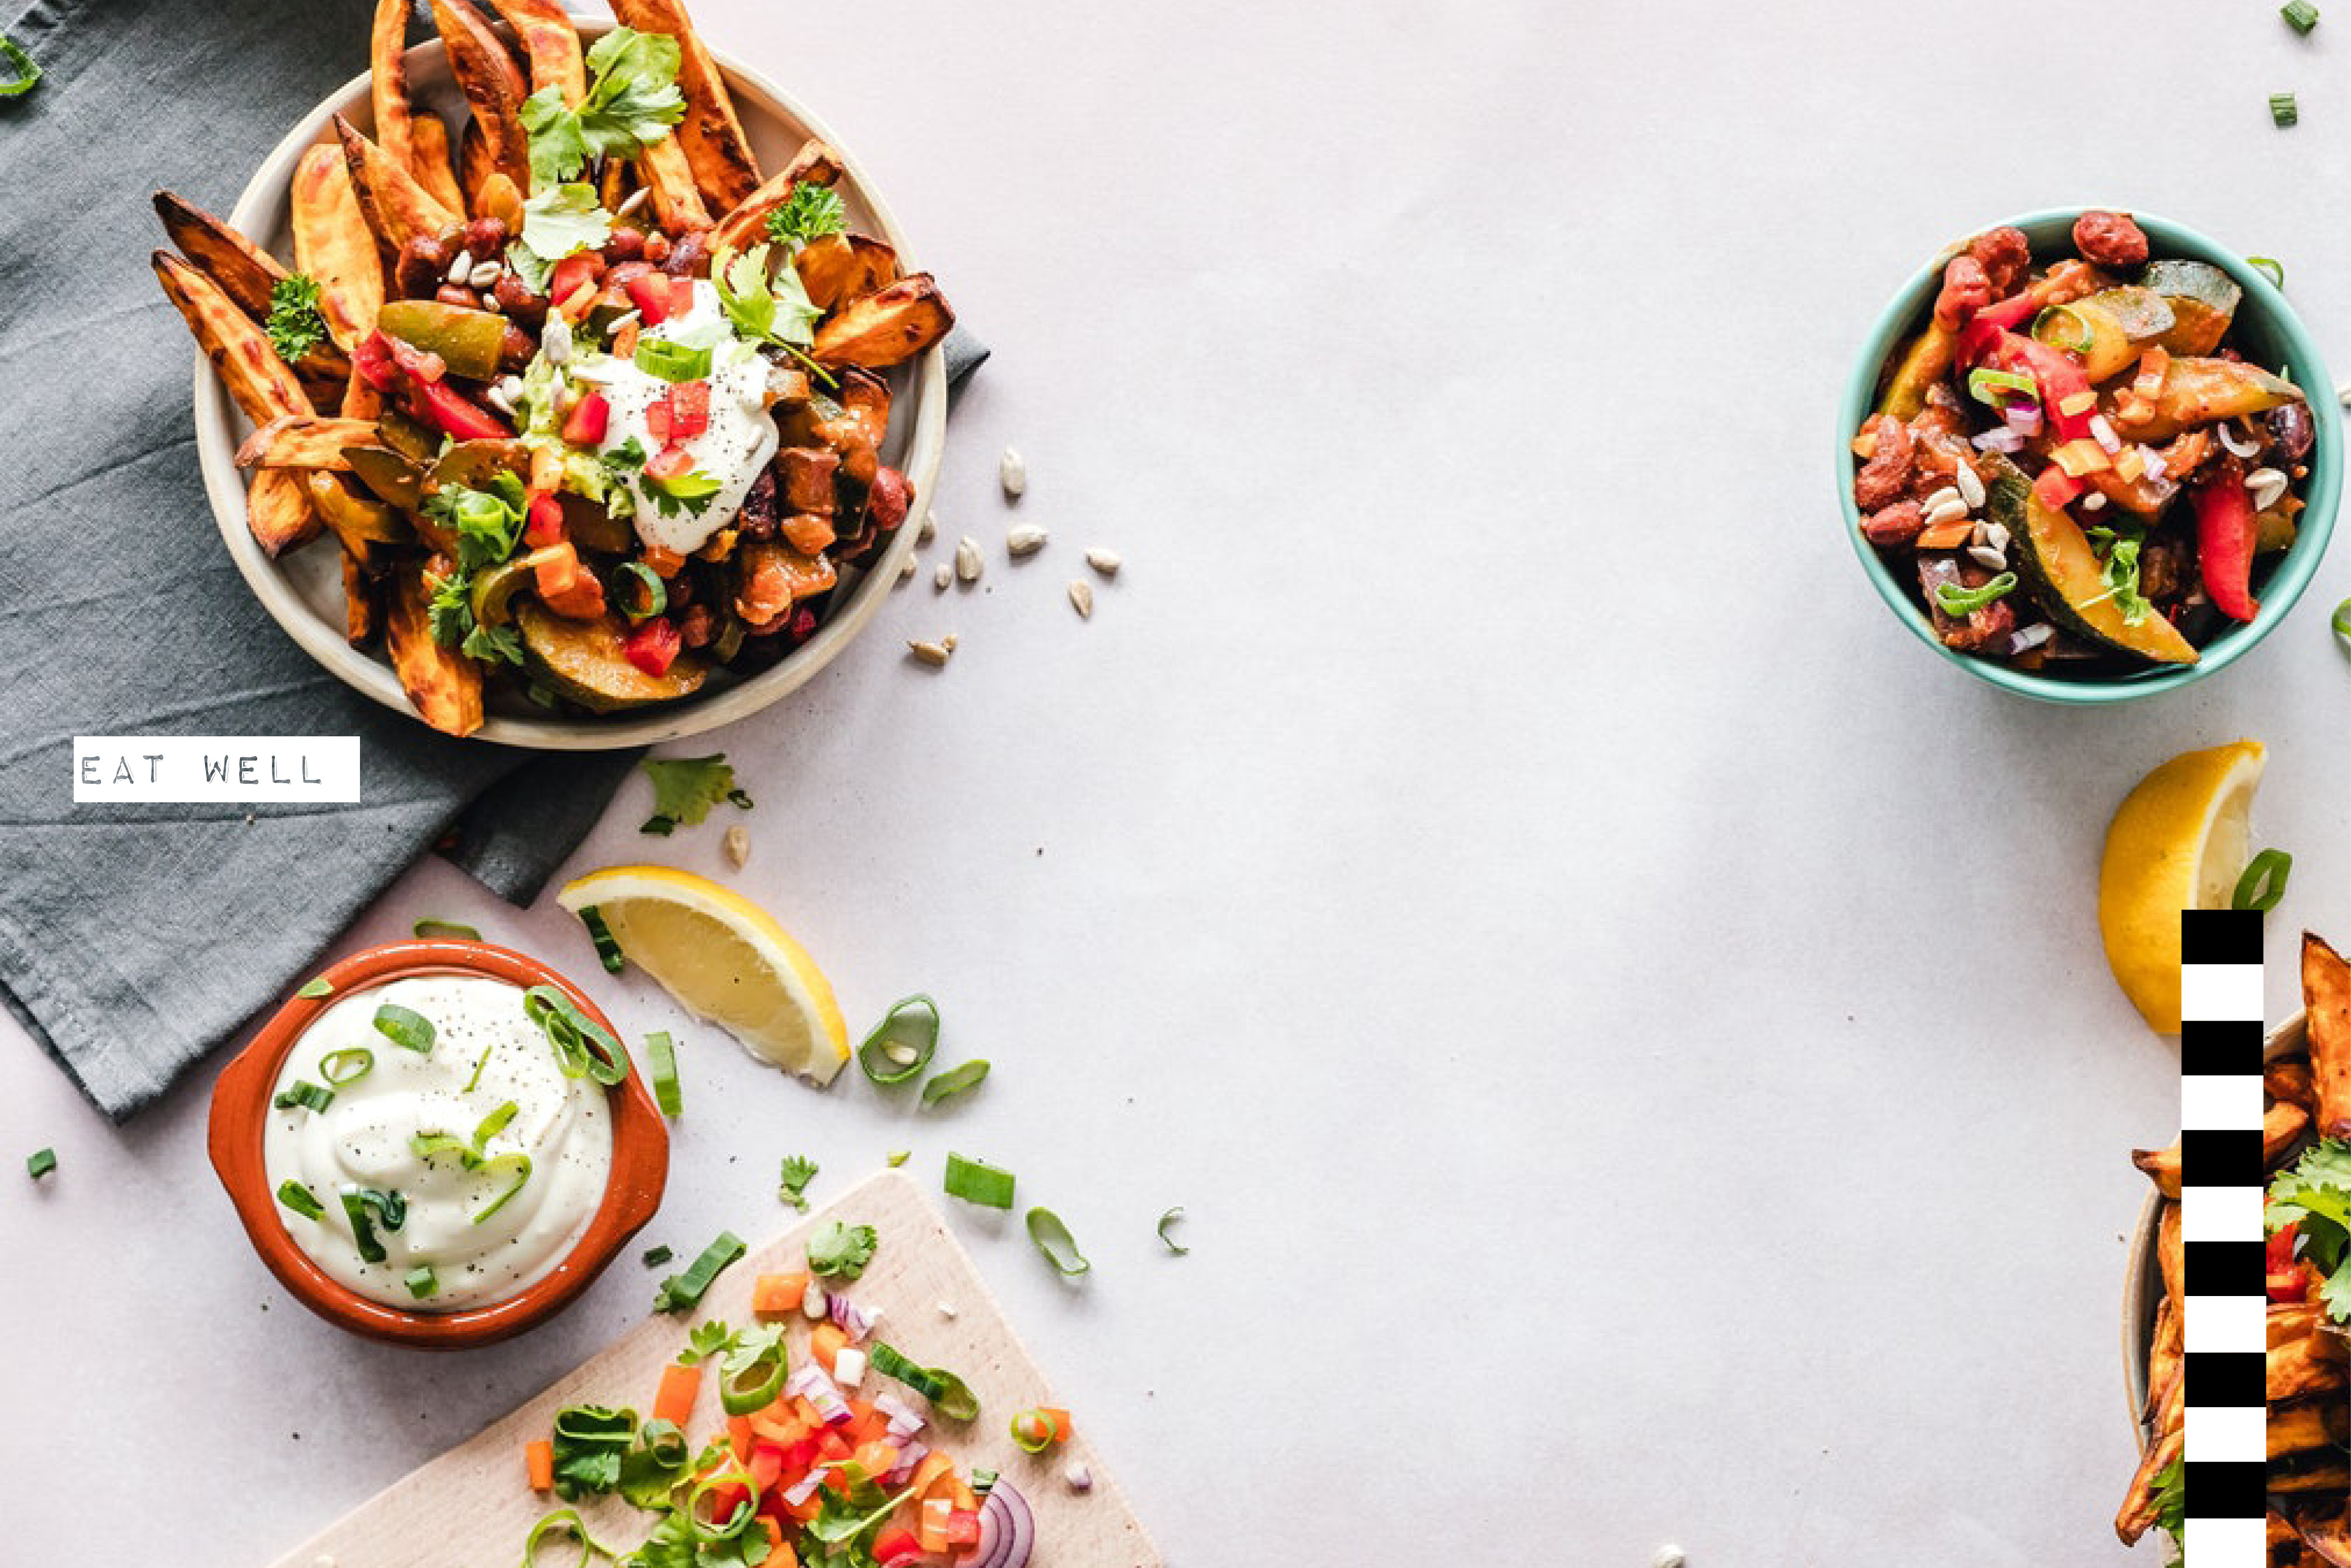 10 Instagram accounts to follow for lunch box inspiration